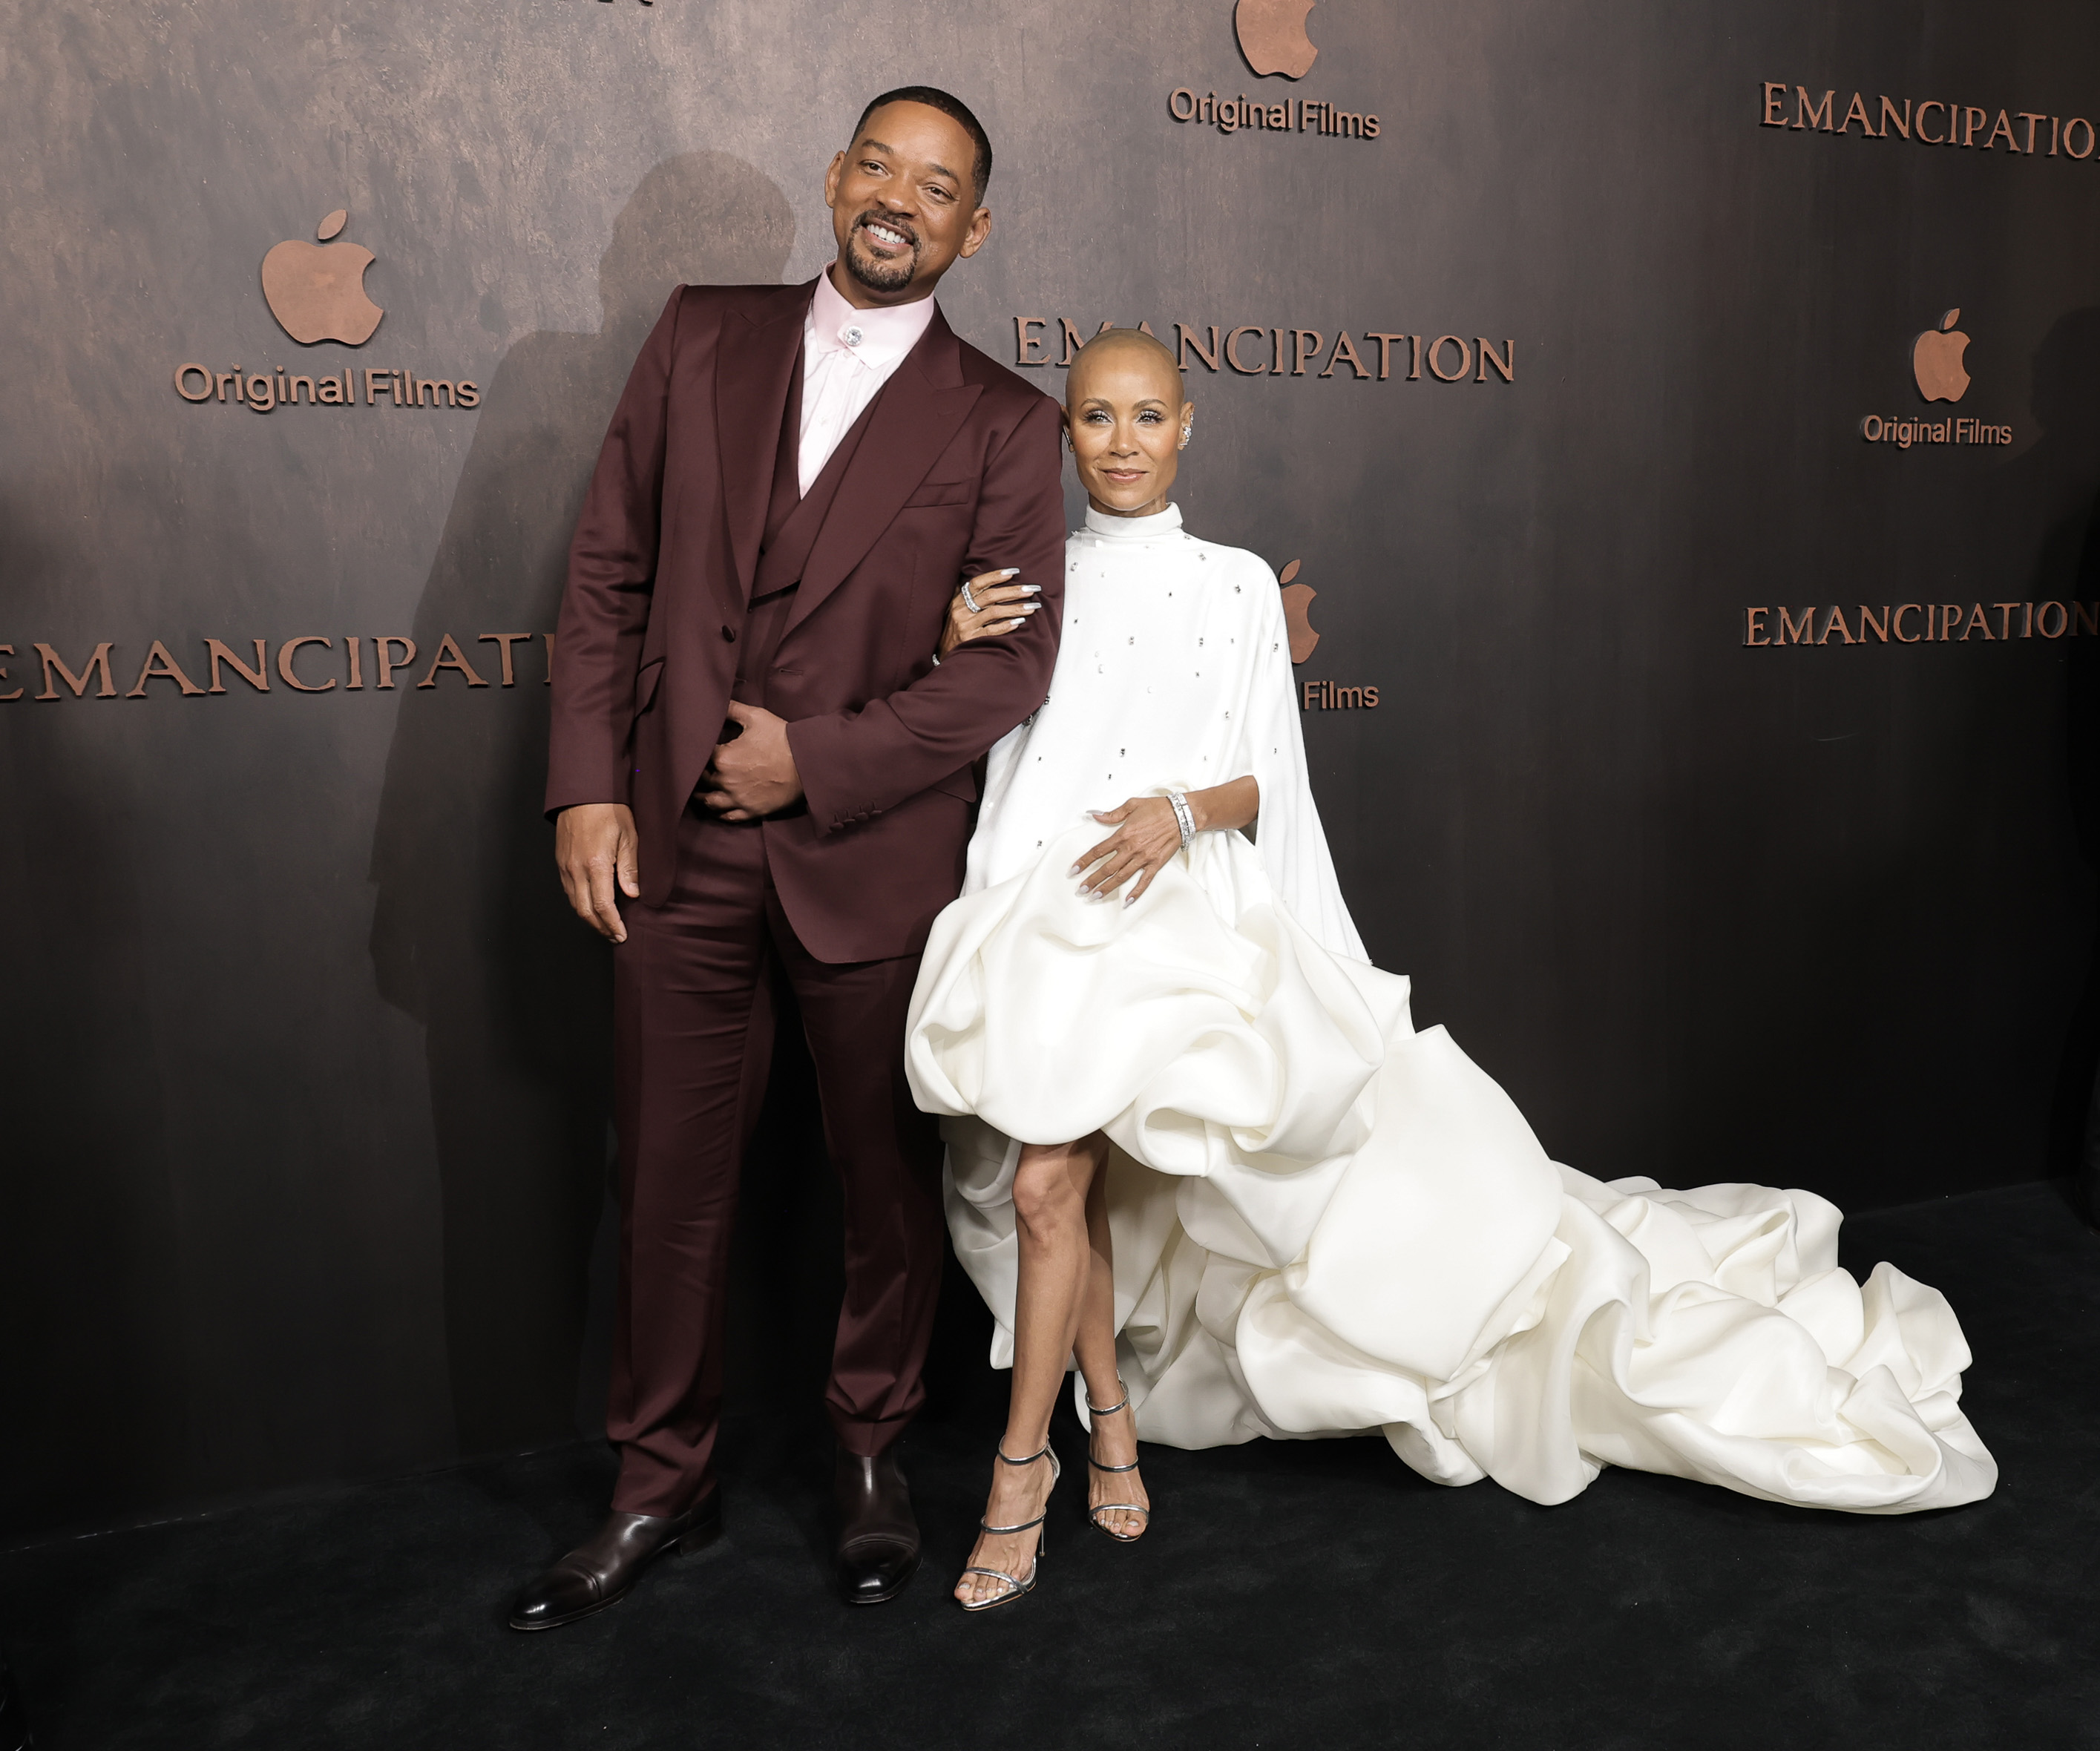 Will Smith's wife sports short hair and occasionally a bald head due to alopcia